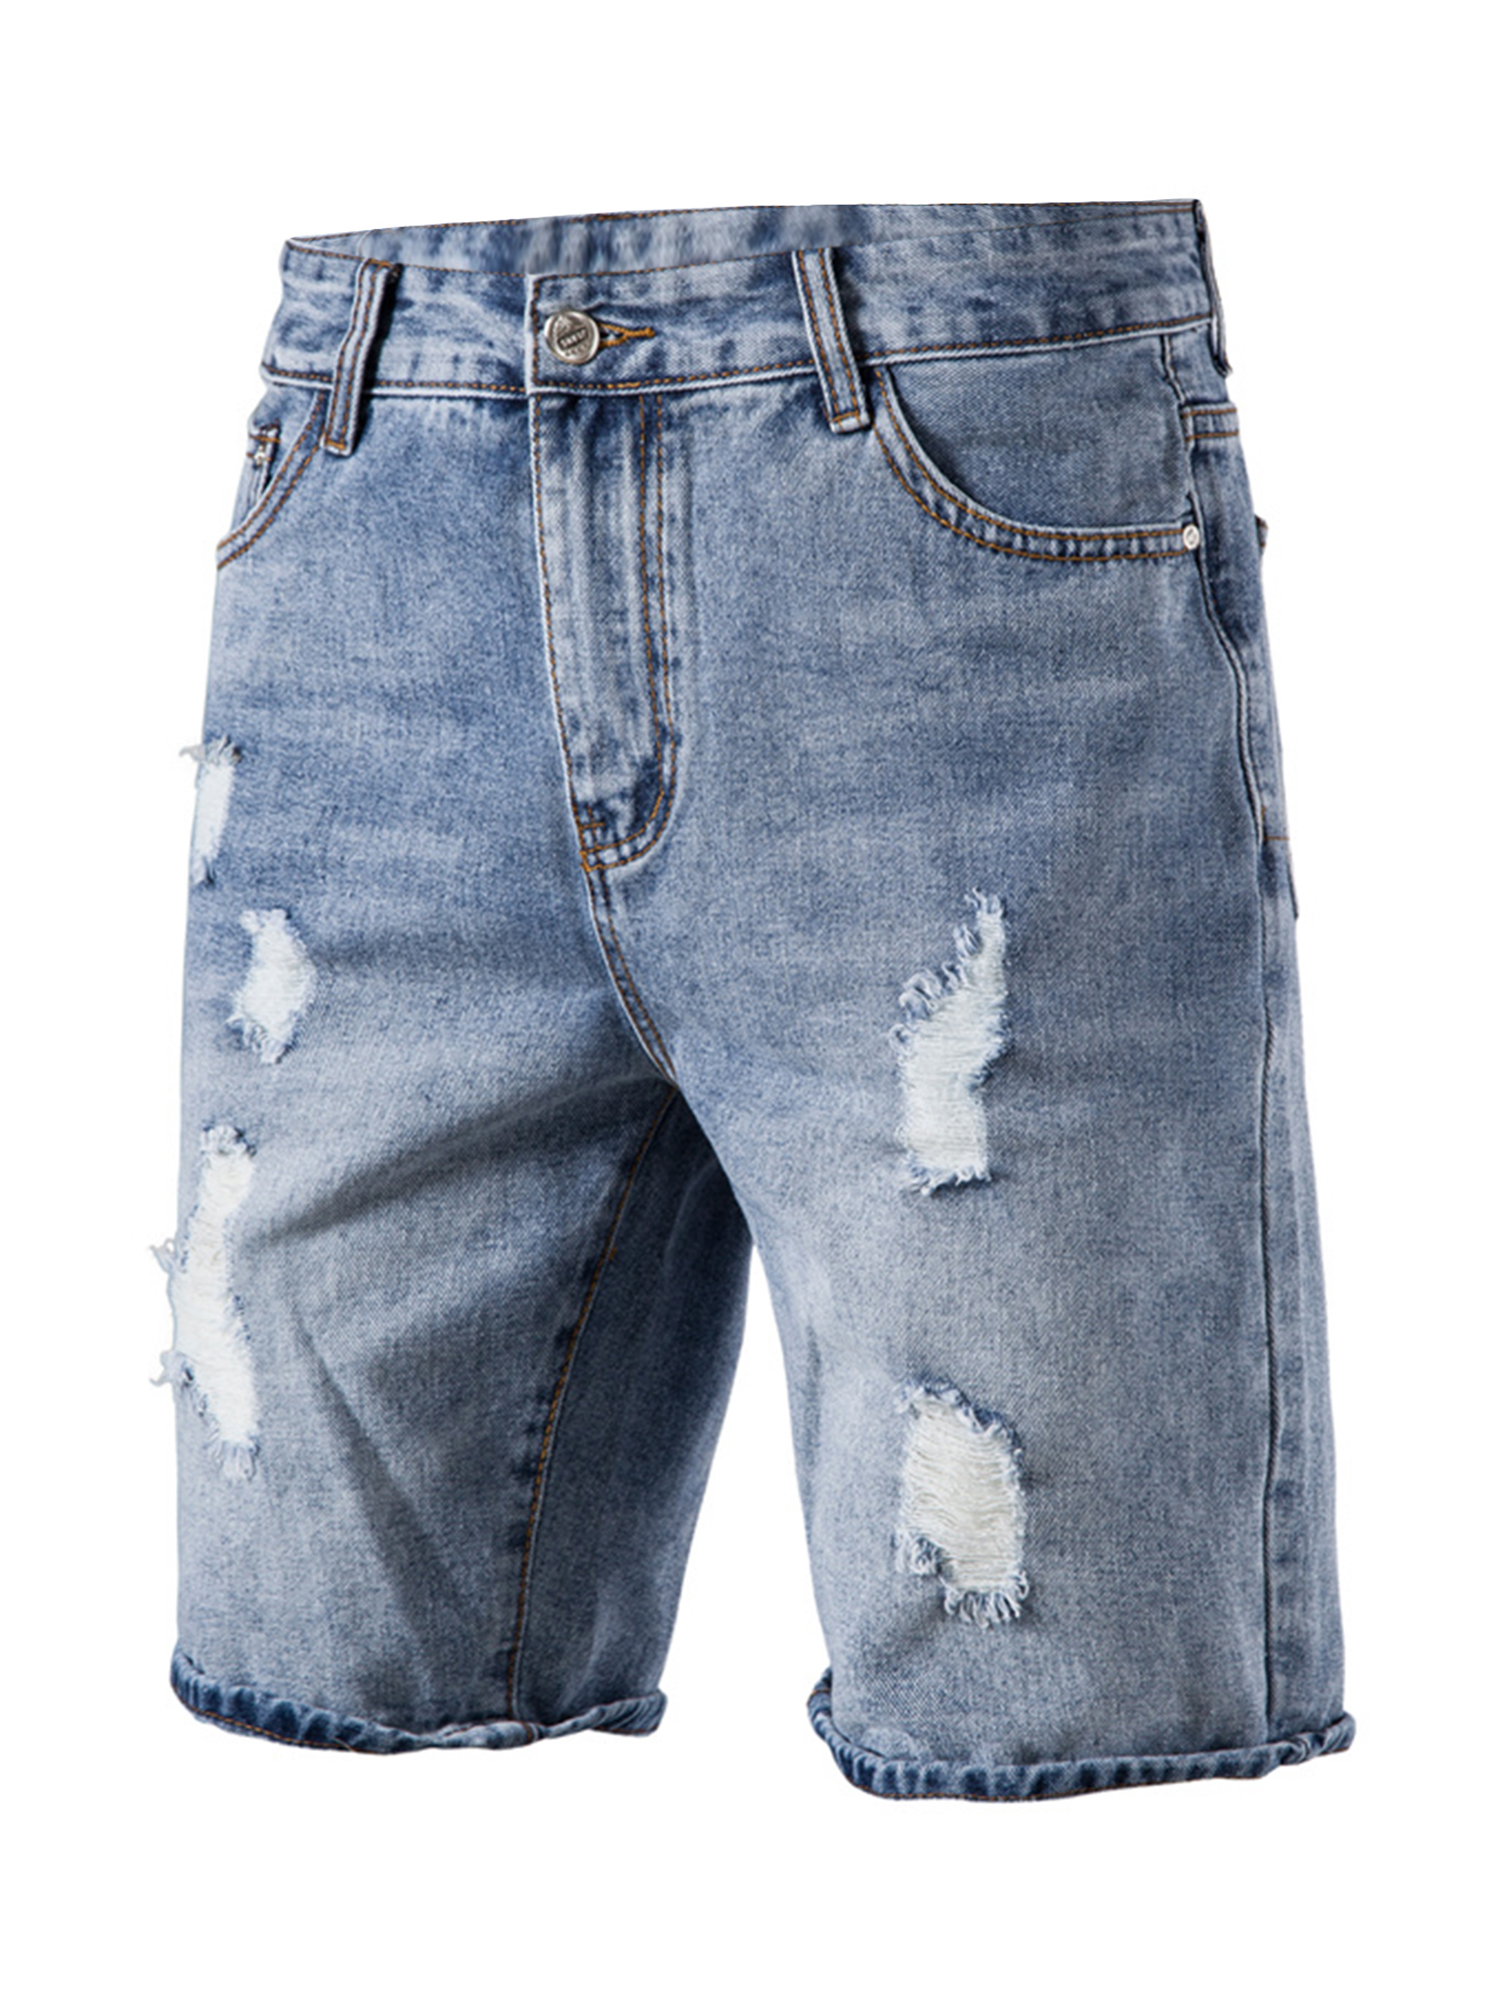 Men-Fashion-Denim-Shorts-Ripped-Distressed-Straight-Slim-Washed-Summer-Knee-Length-Stretchy-Jeans-Shorts-1.jpg